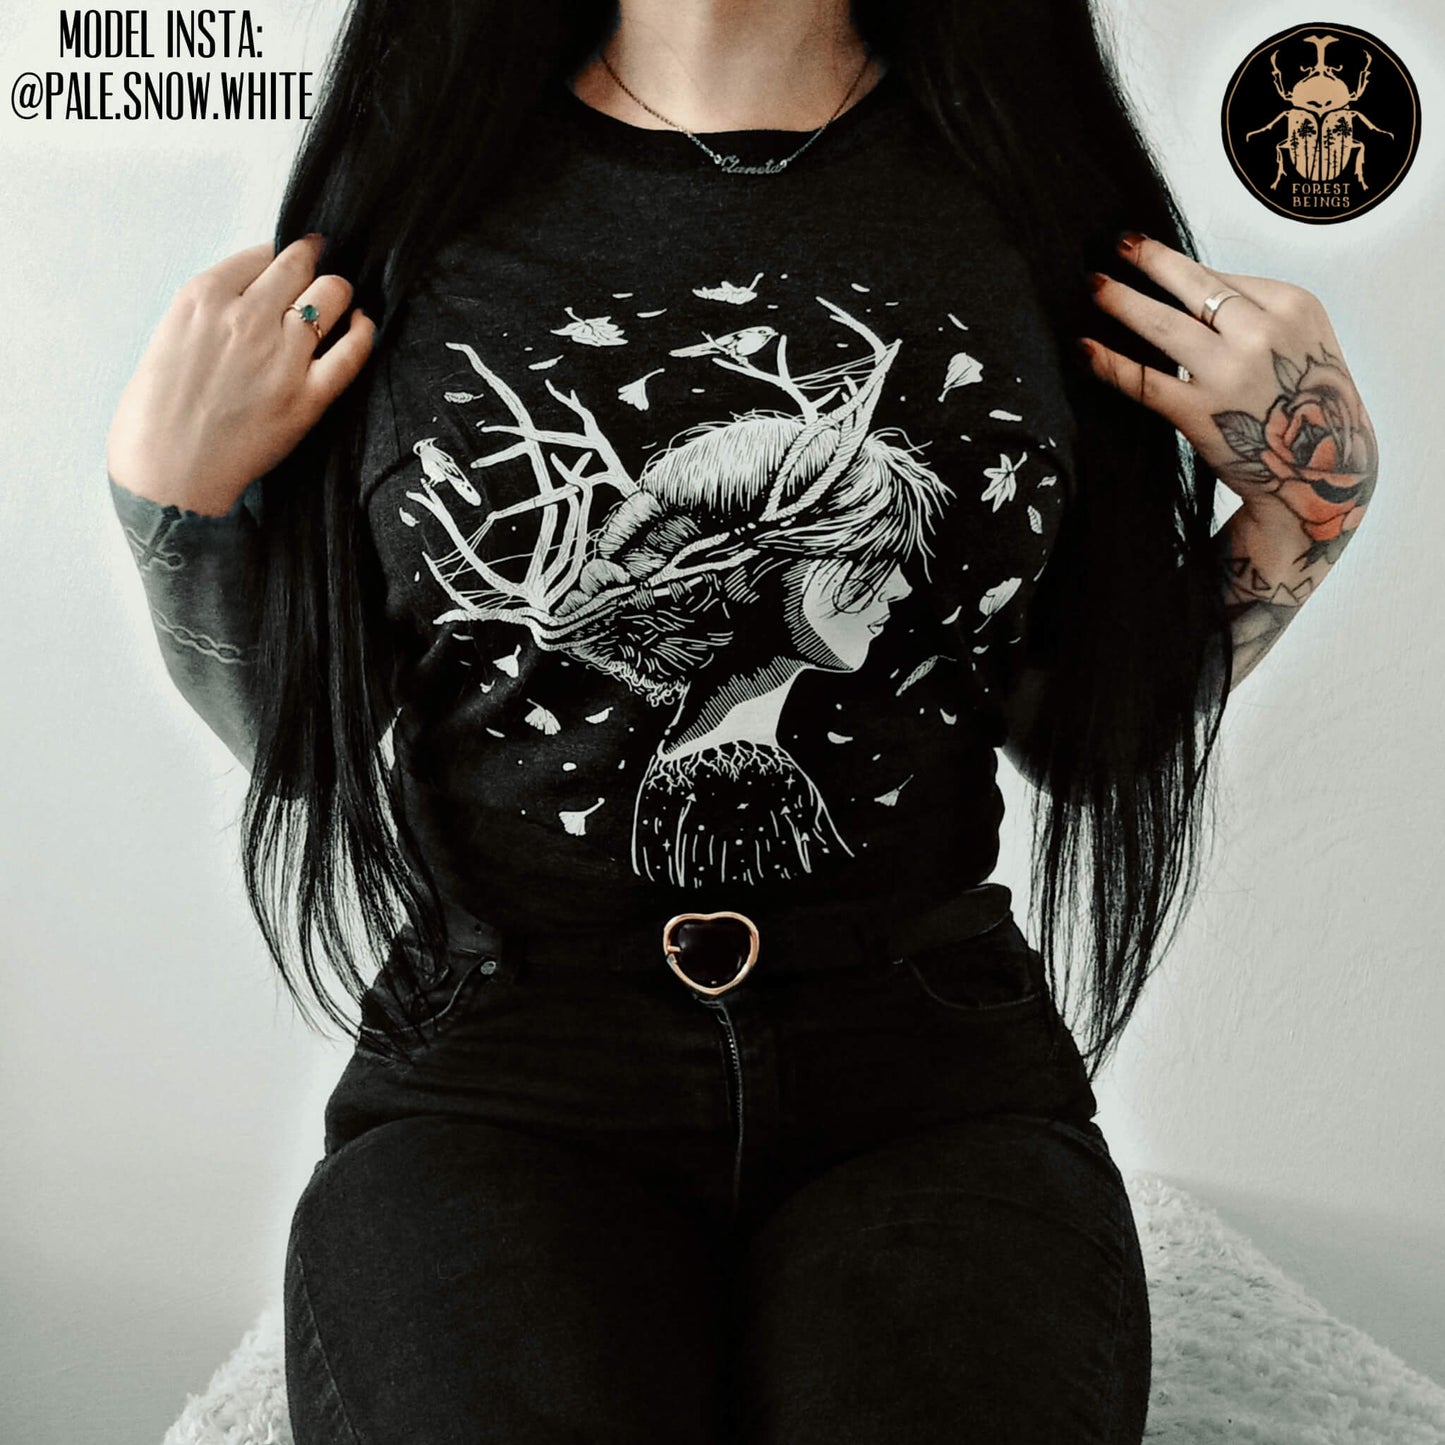 Cute witchy goth girl with long black hair and tattoos on her arms and legs, wearing an aesthetic goth graphic t-shirt. The design of the t-shirt is a forest witch, surrounded by falling autumn leaves. 